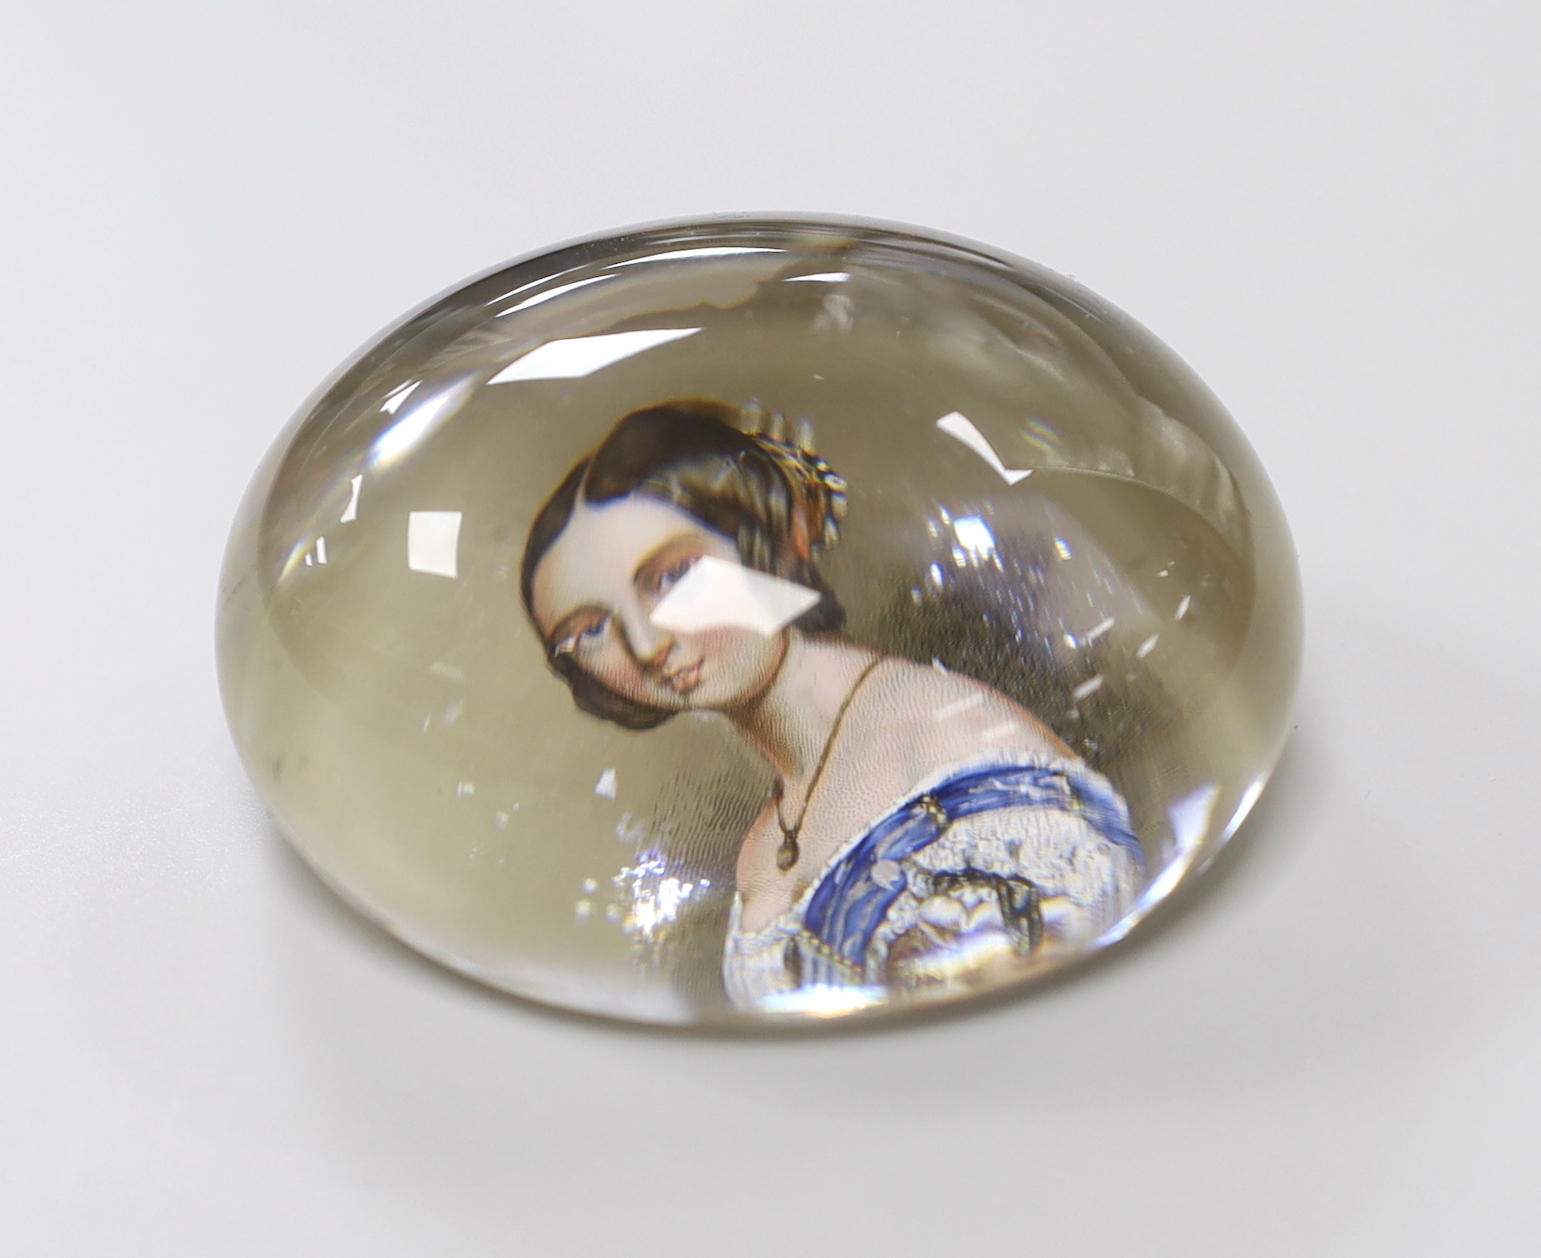 A Queen Victoria reverse decorated glass paperweight, approximately 7.5cm diameter